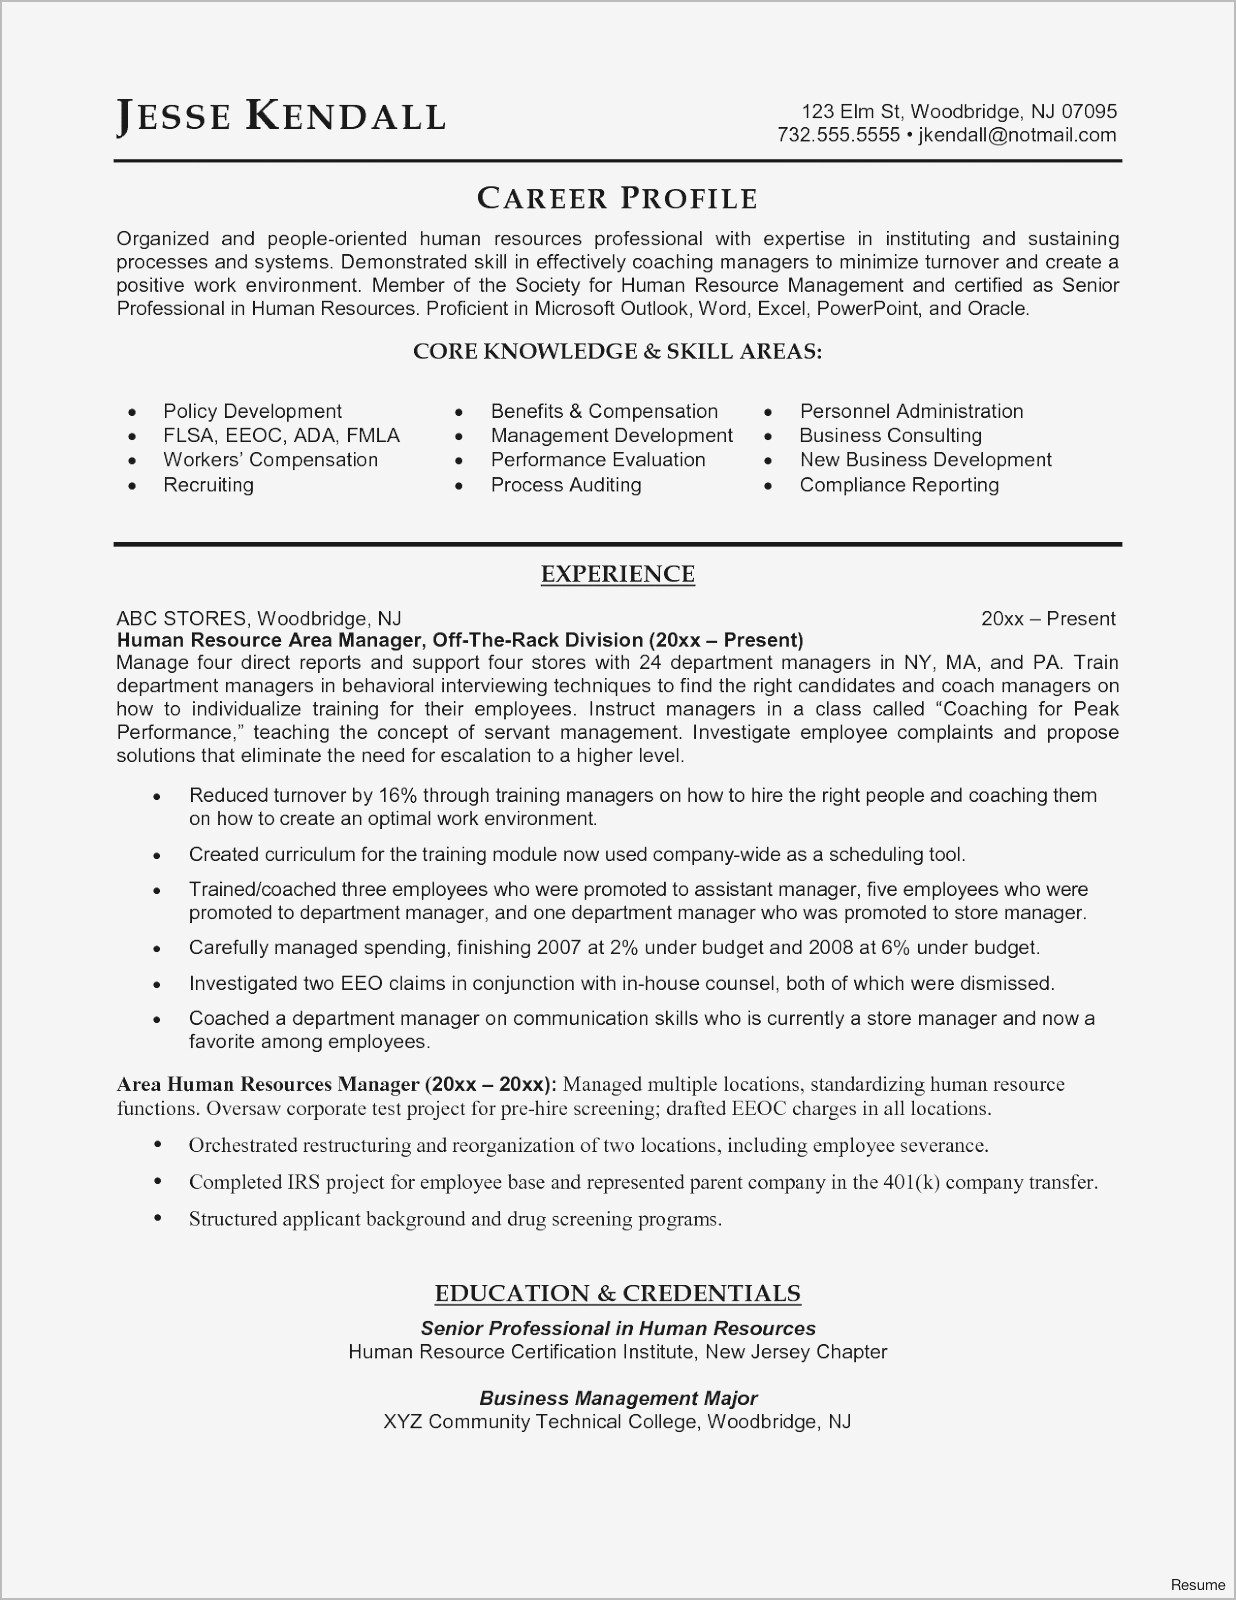 Letter to Parent Template - Fresh Letter Outline Template